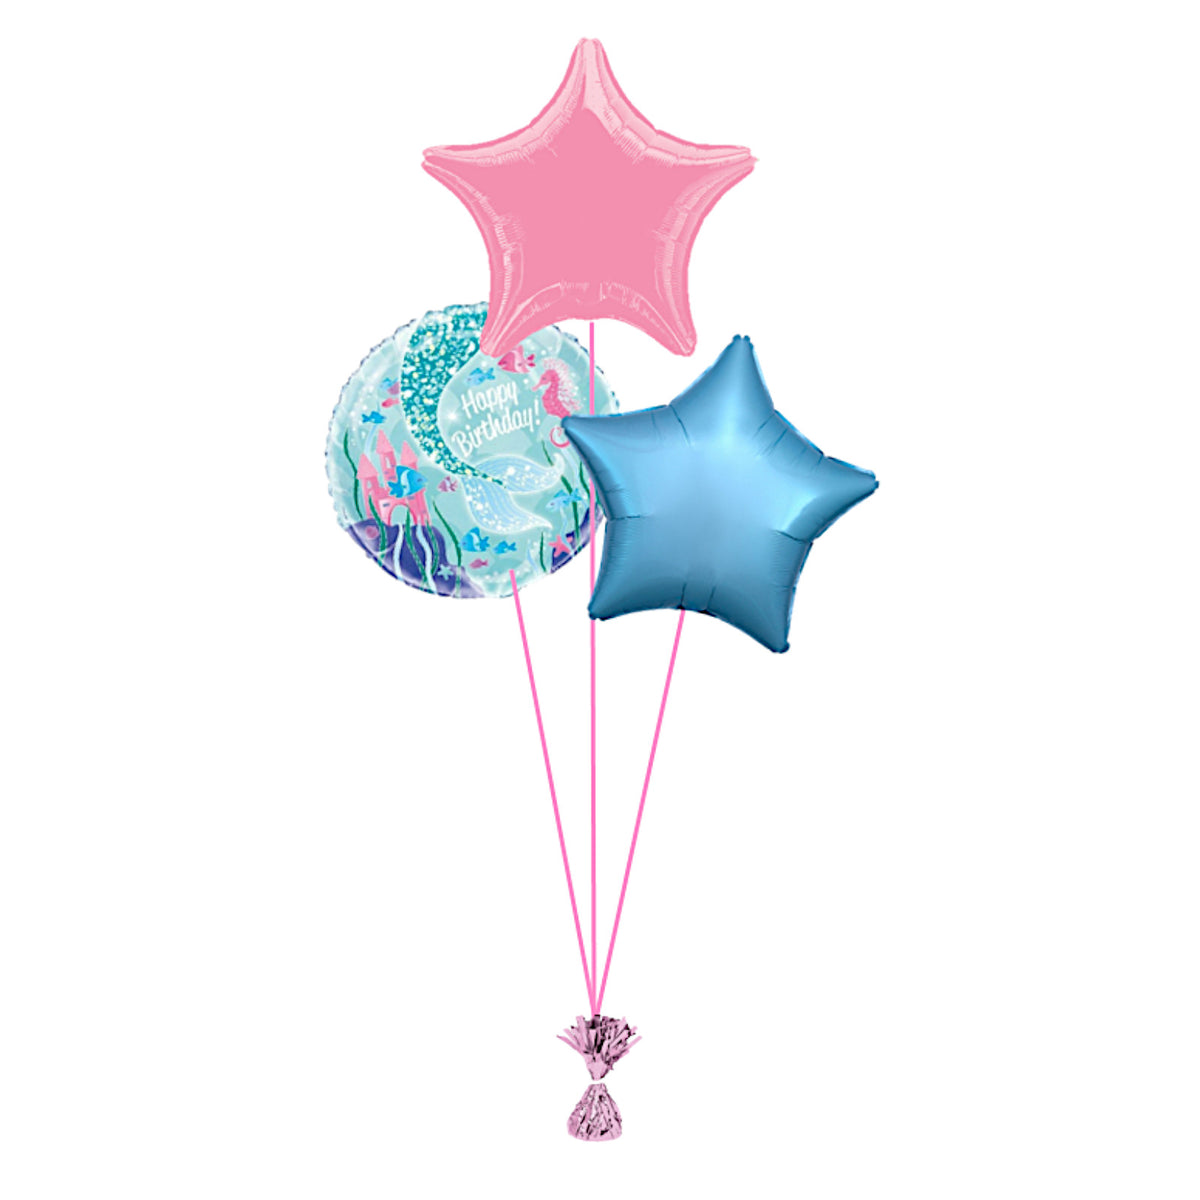 COLLECTION ONLY - Mermaid Tail Under the Sea 3 Foil Balloon